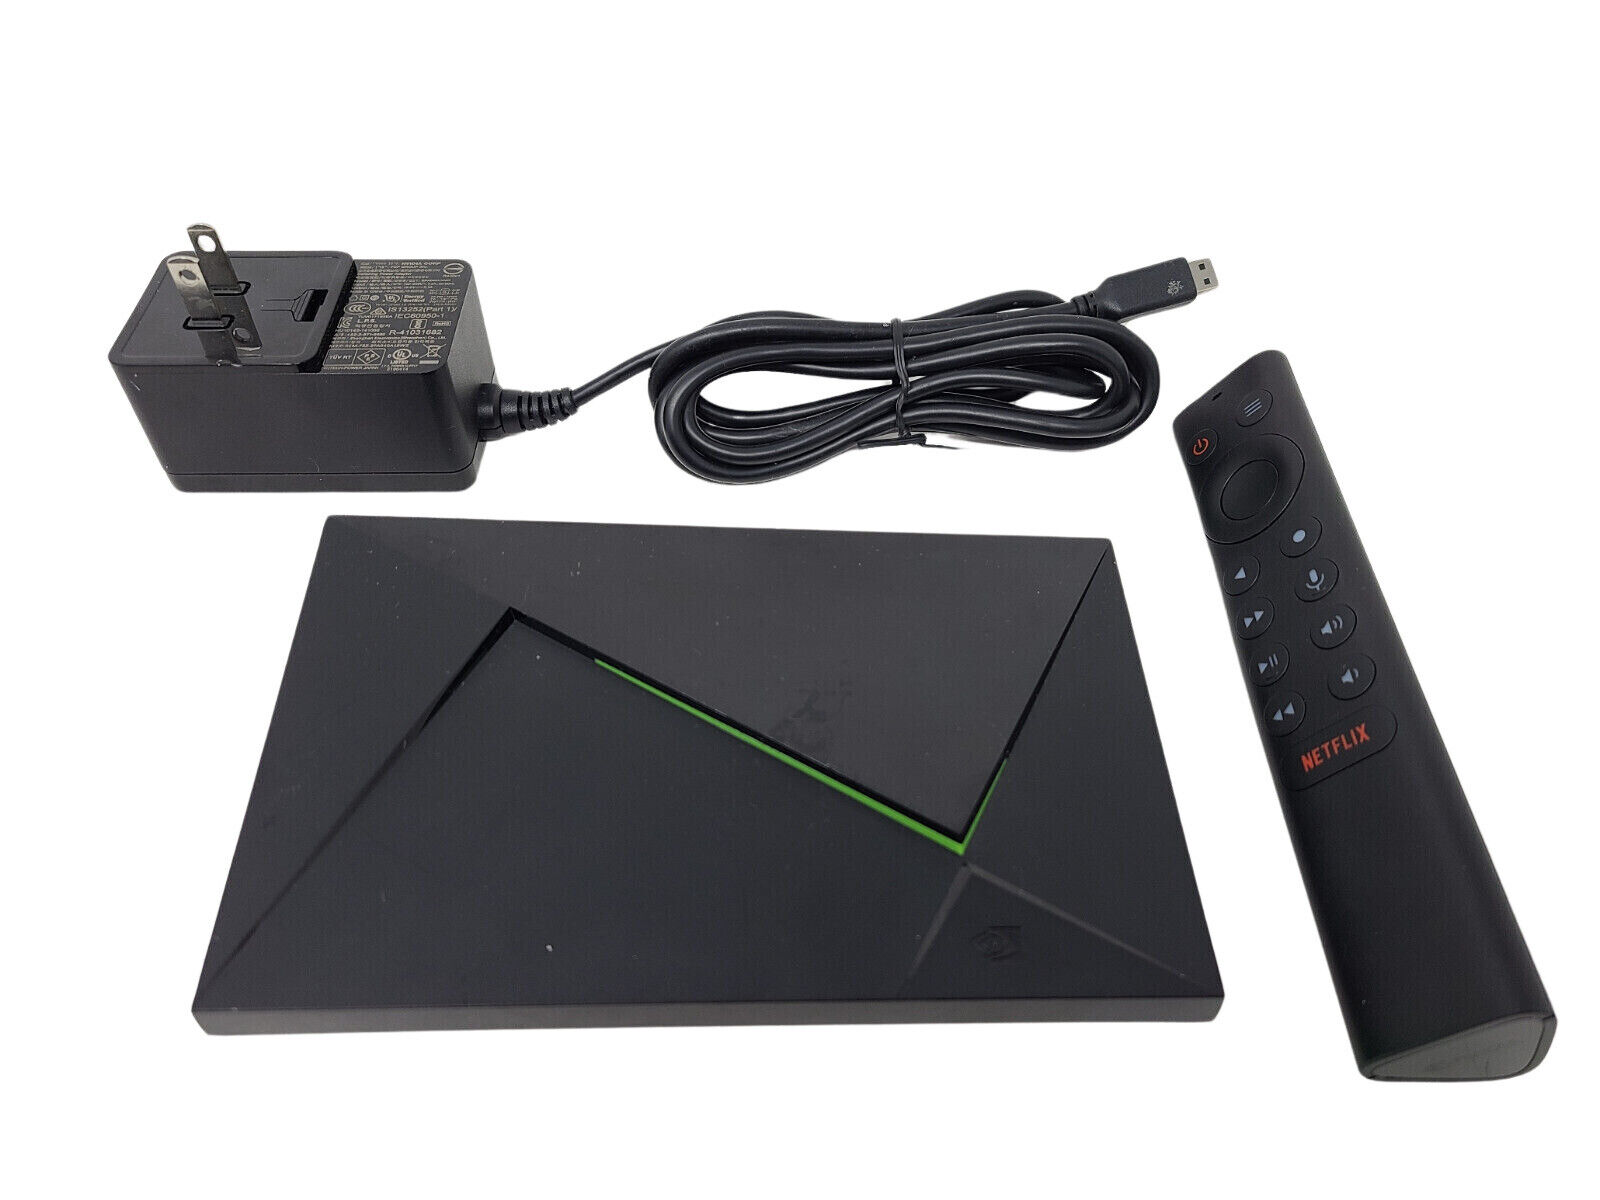 Prime Day Deal: 15% Off NVIDIA Shield Android TV Pro 4K HDR